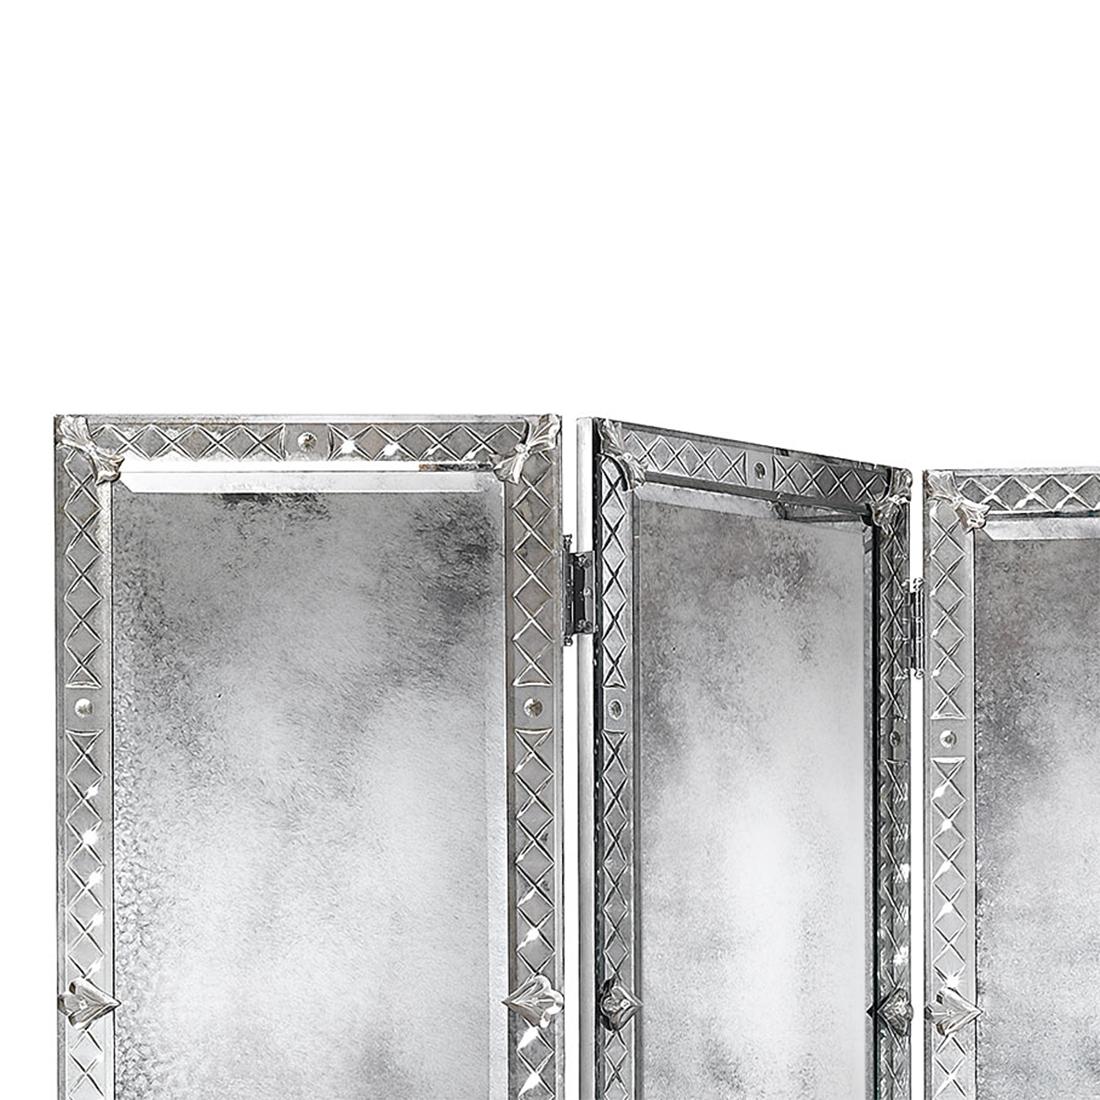 Screen majesty with four folding panels with structure
in solid wood and with handmade and engraved and
beveled antique mirrored glass in silvered and antiqued
finishes. Wooden edges and back side in silvered and
antiqued finishes. Hand silvered